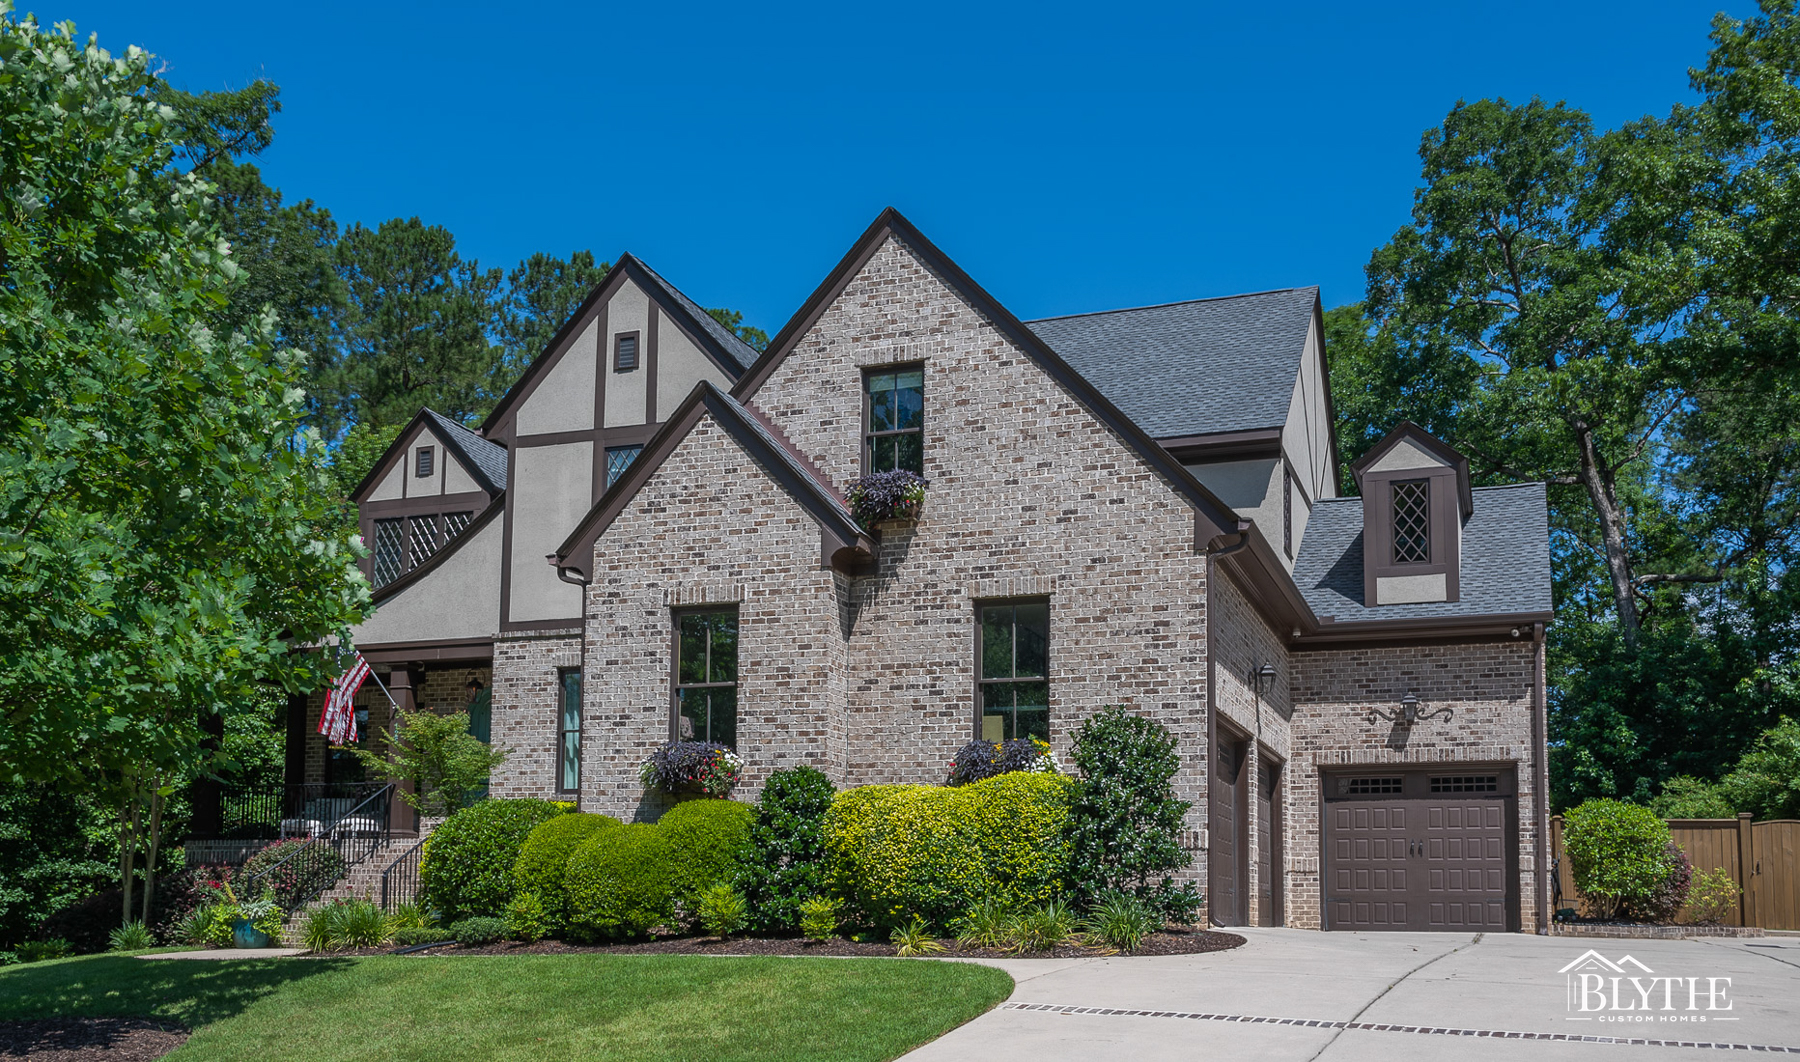 Brick and stucco Tudor-style home with 3-car garage, multiple front-facing gables, and beautiful shrubbery and front yard.